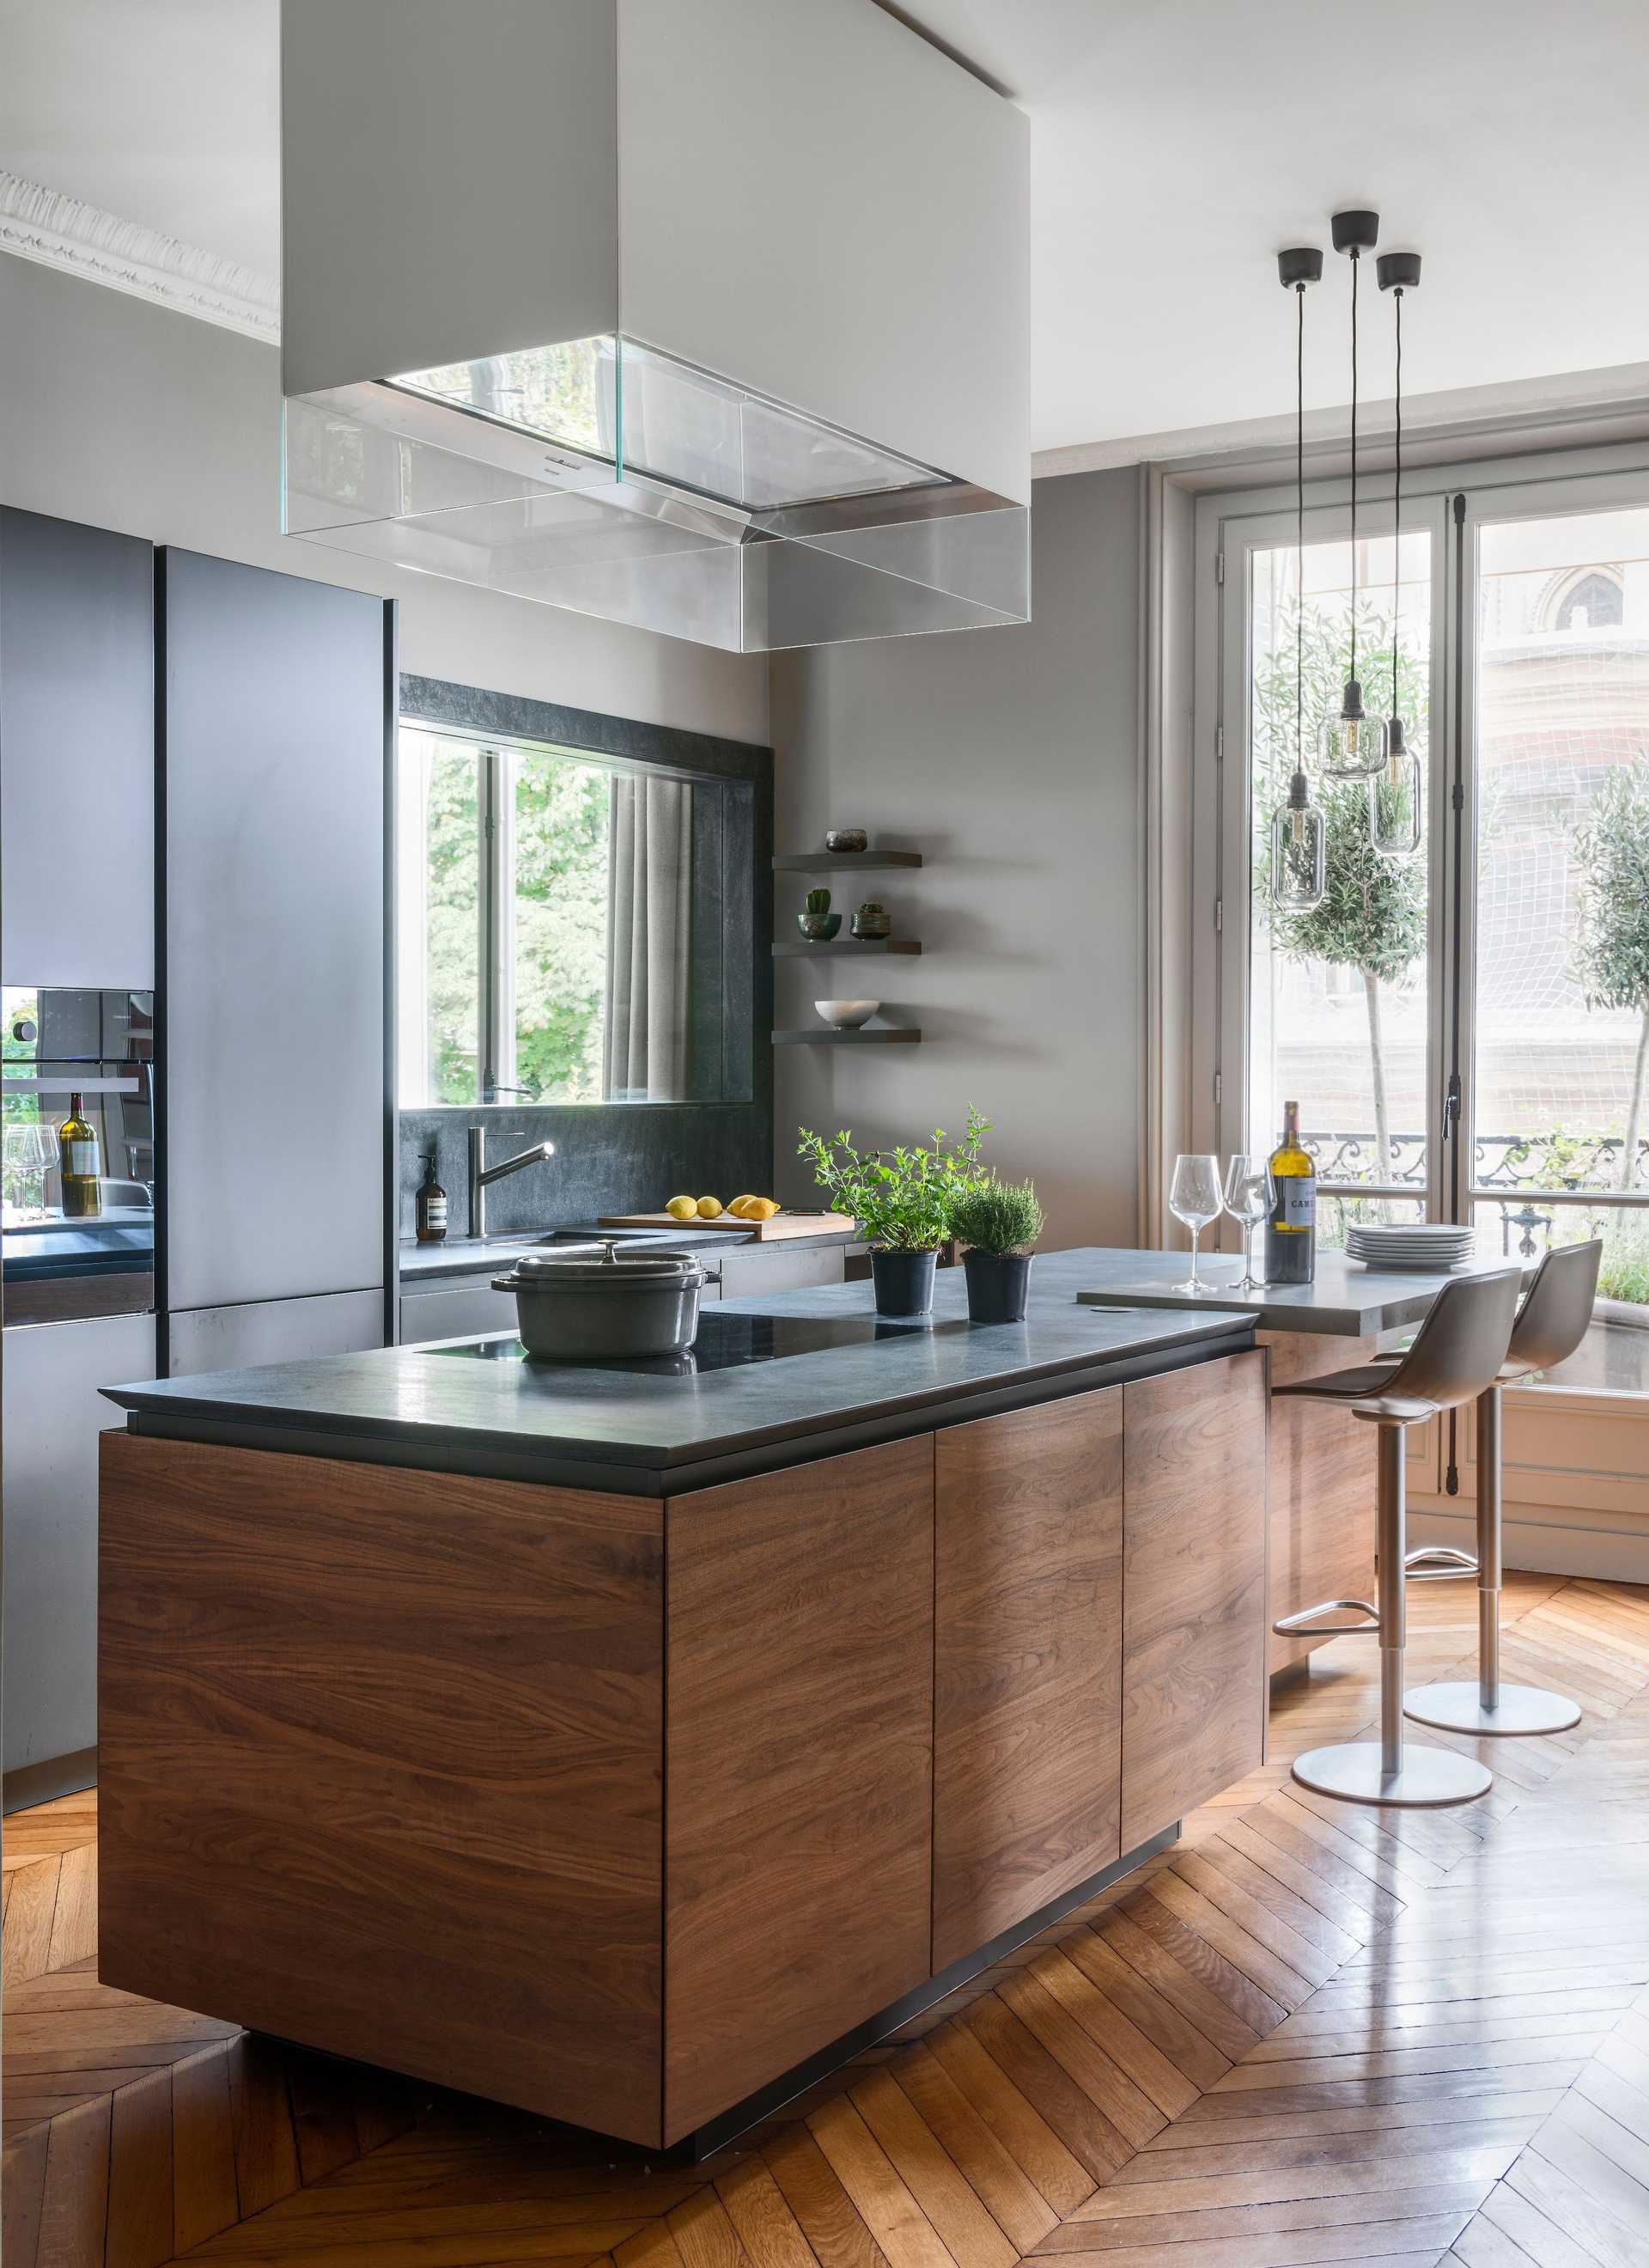 Renovation of the kitchen of an old apartment by an interior designer in Montpellier